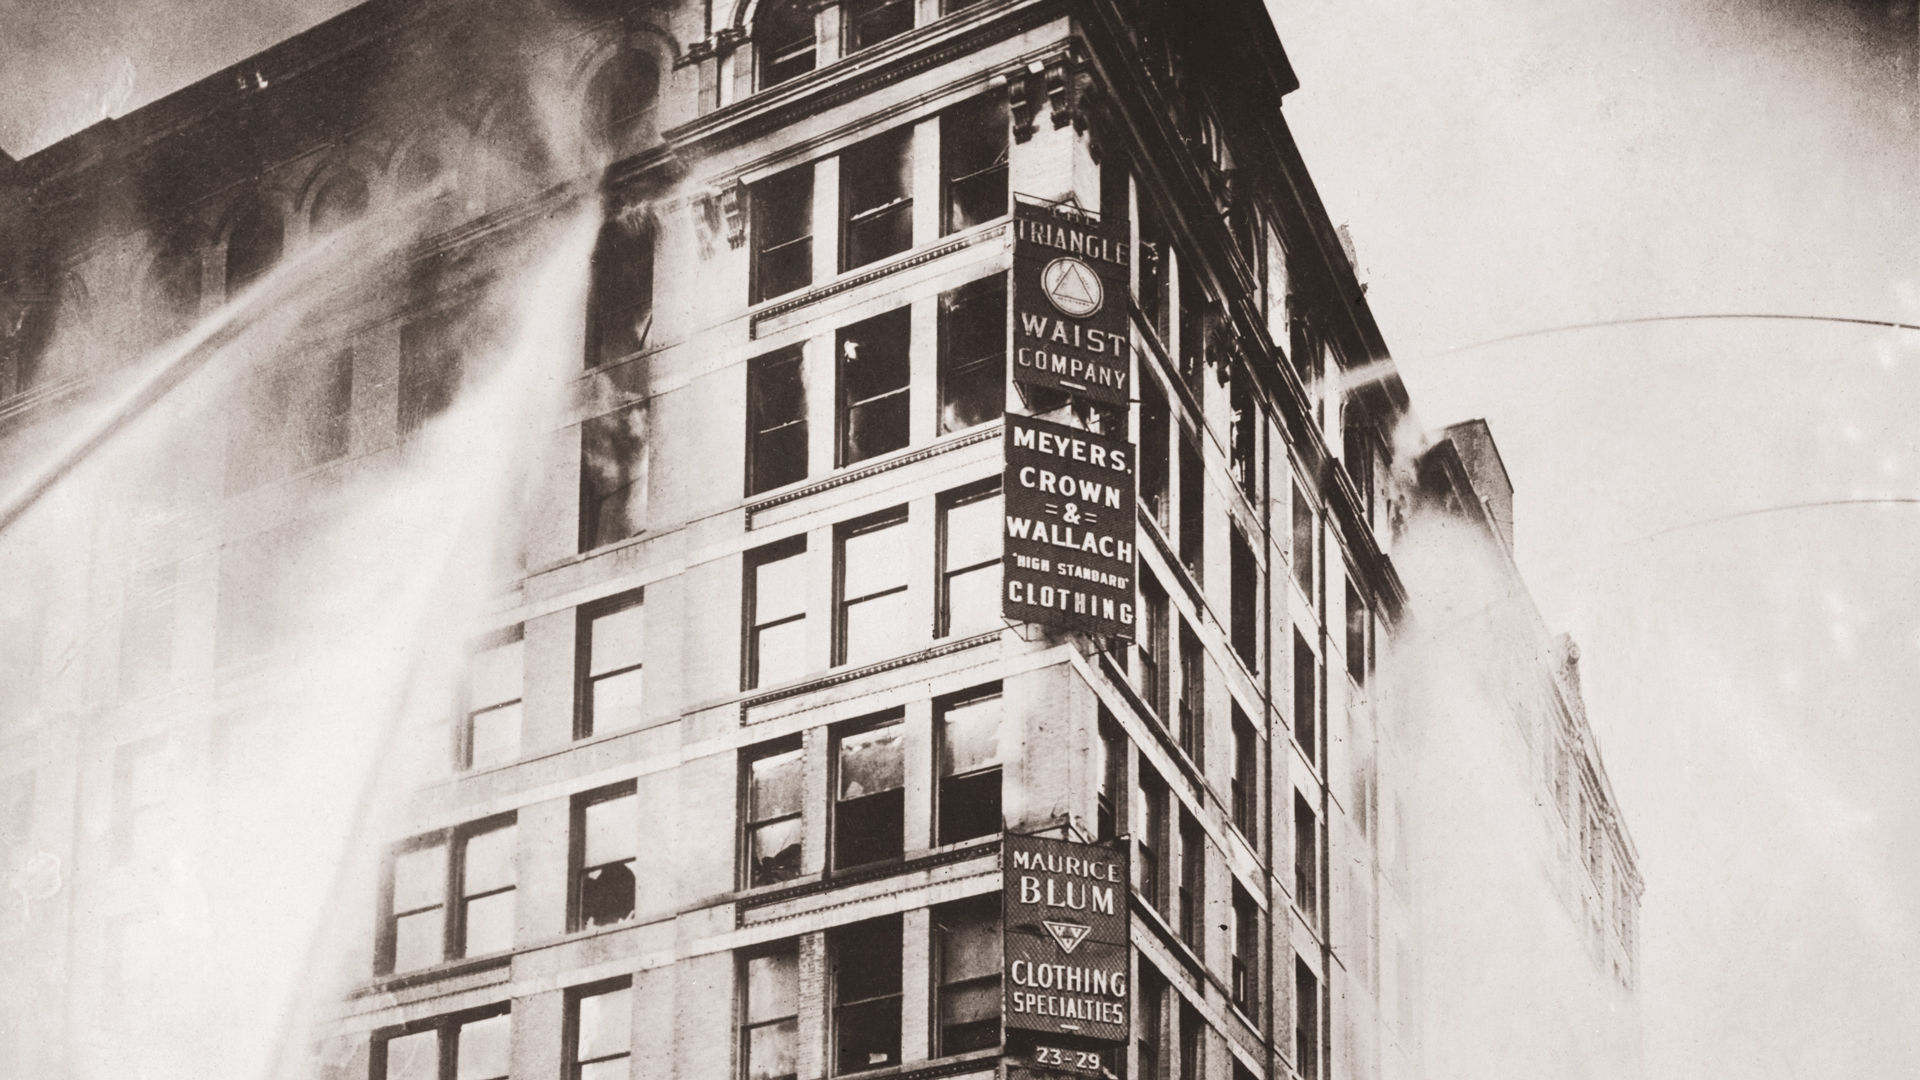 How the Horrific Tragedy of the Triangle Shirtwaist Fire Led to Workplace Safety Laws